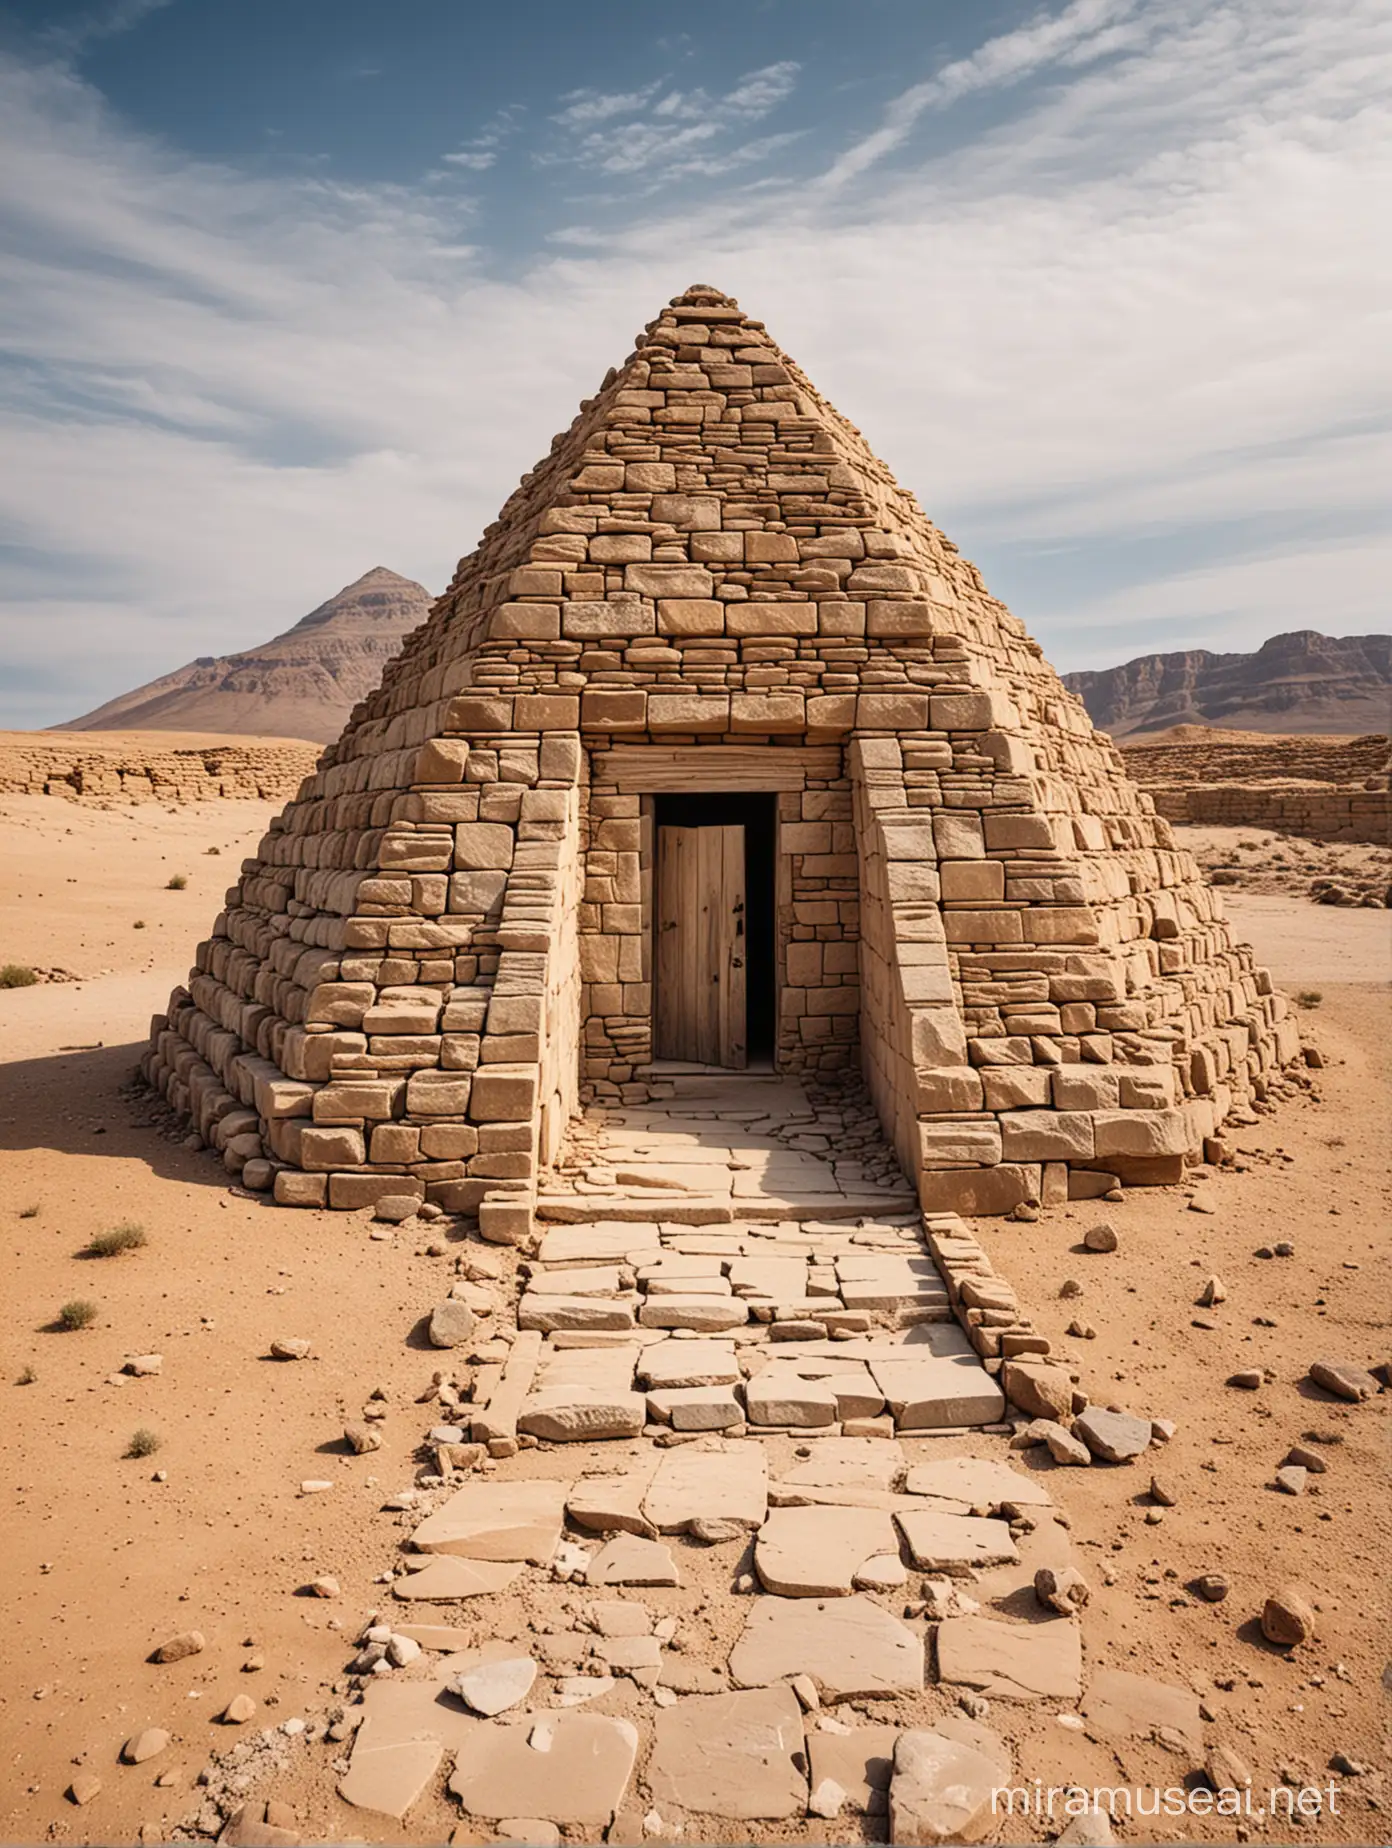 Desert Stone Pyramid with Ancient Entrance